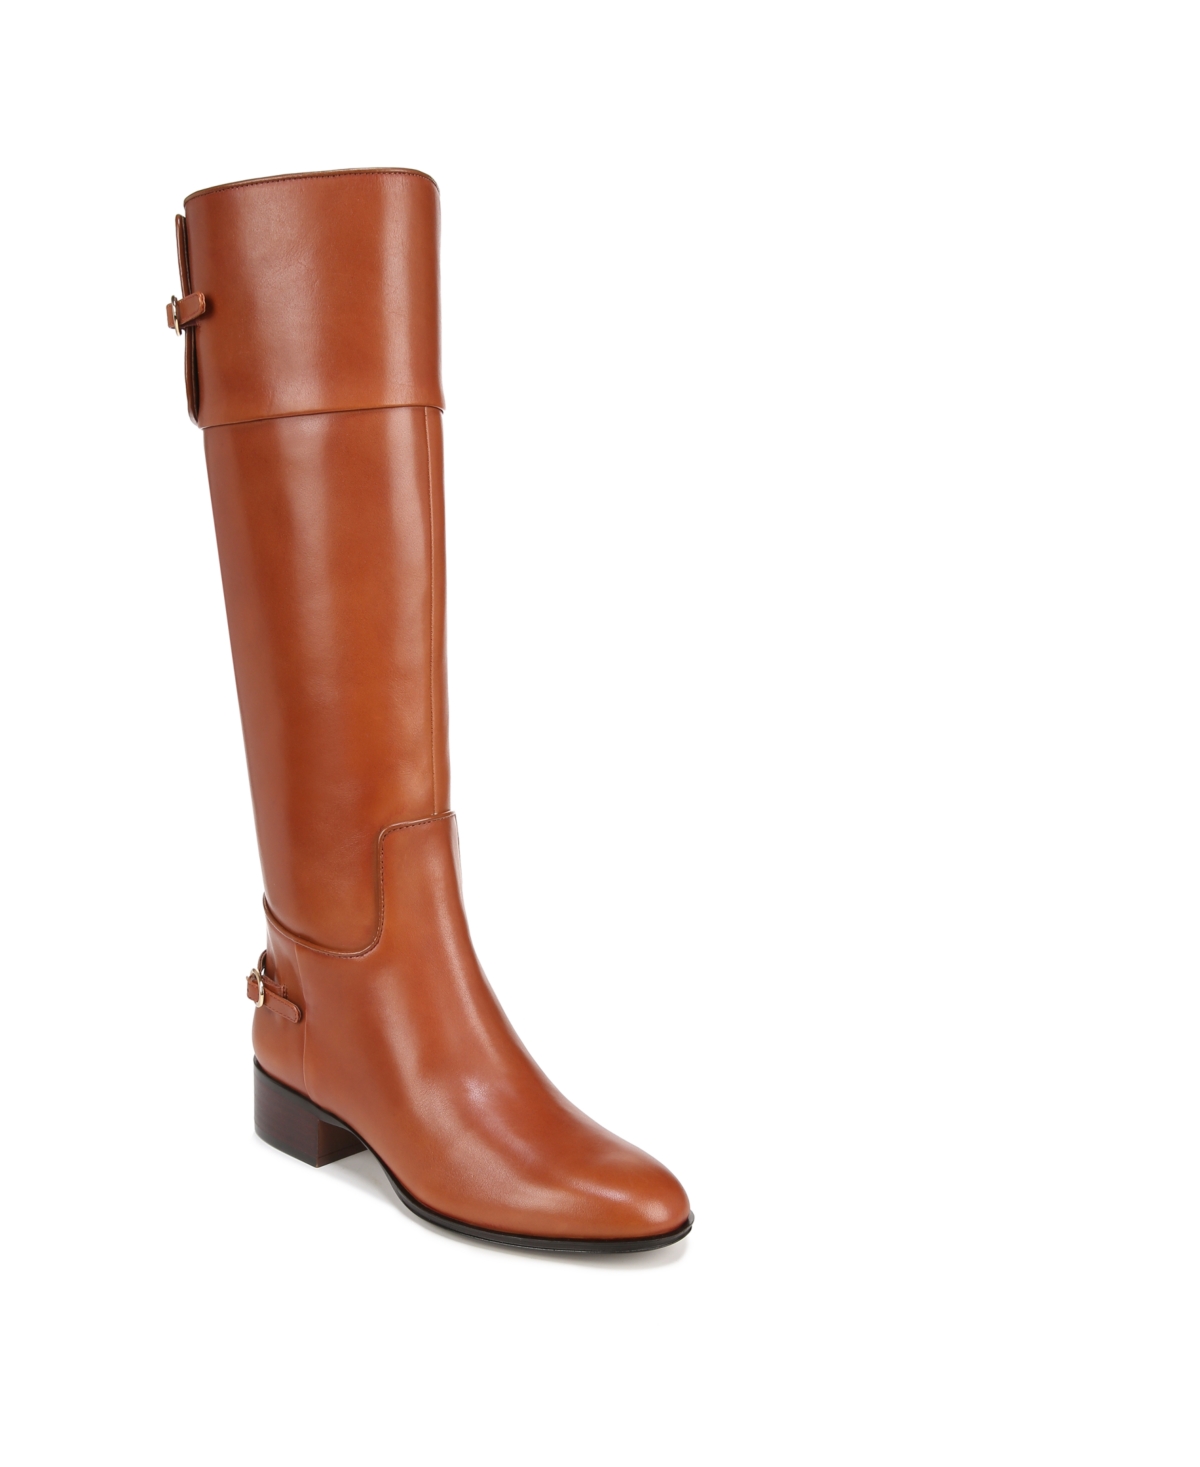 Jazrin Knee High Riding Boots - Cognac Brown Leather